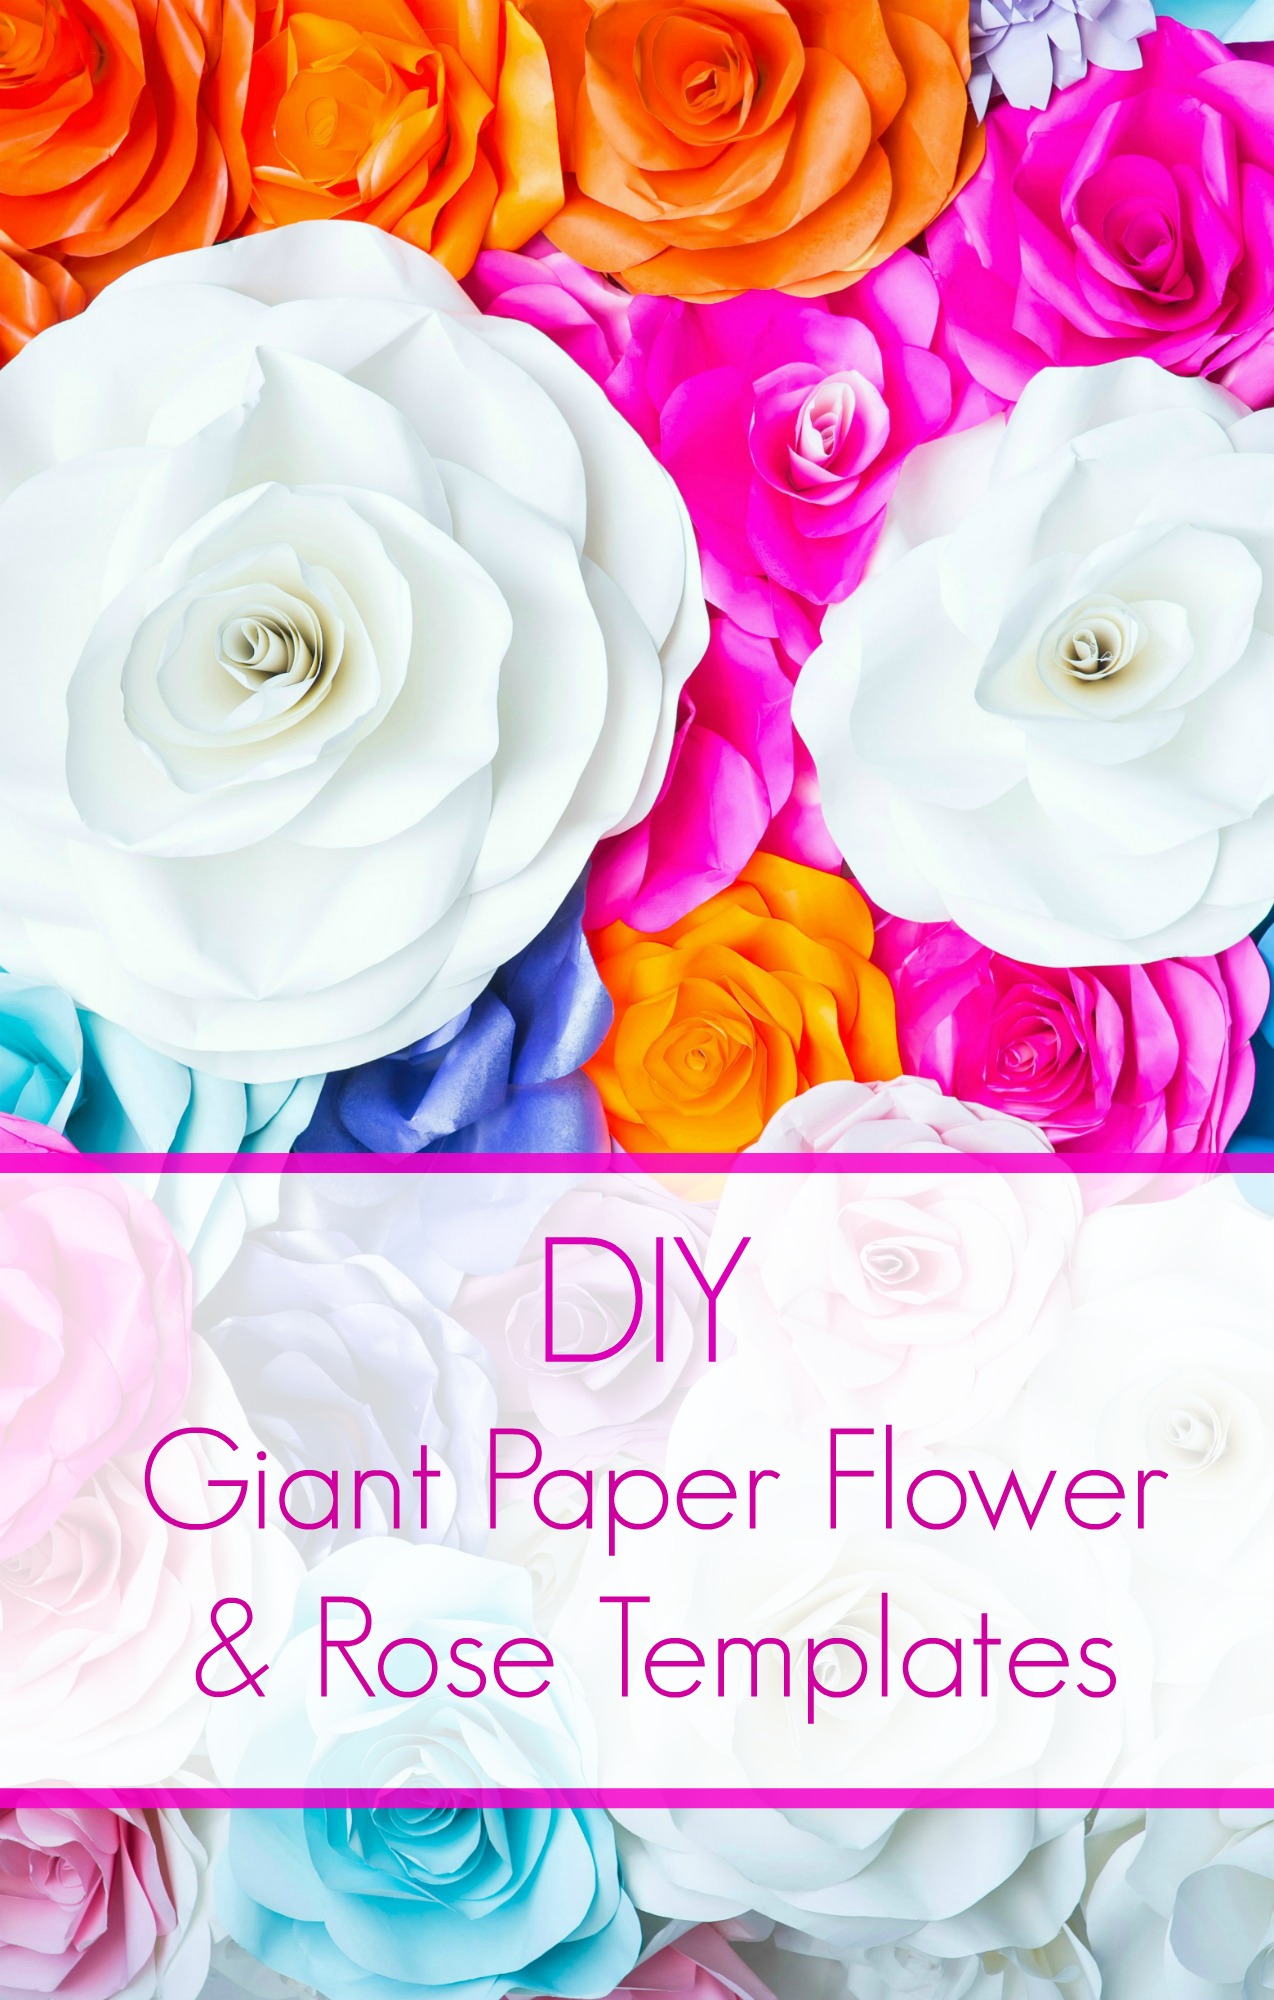 How to make easy paper flowers. Paper flower templates